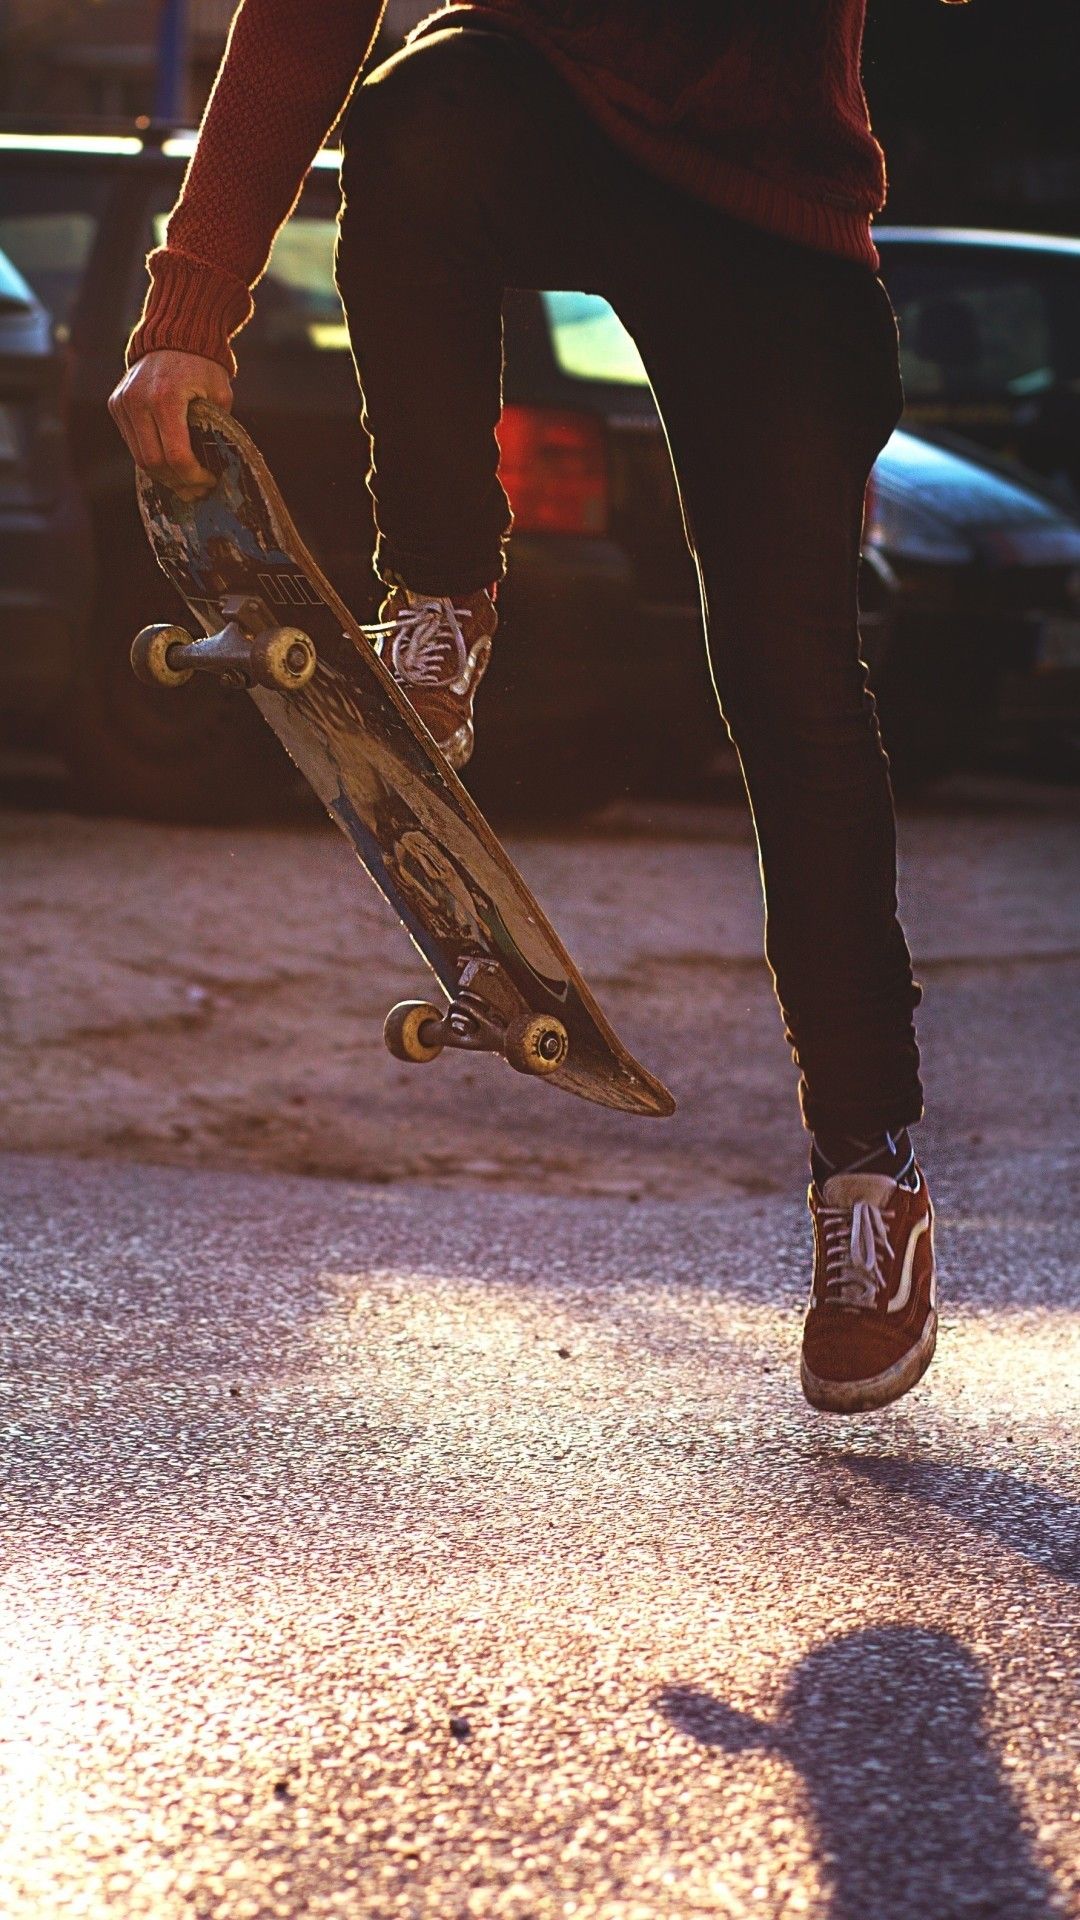 A person holding a skateboard in one hand and jumping in the air with the other - Skate